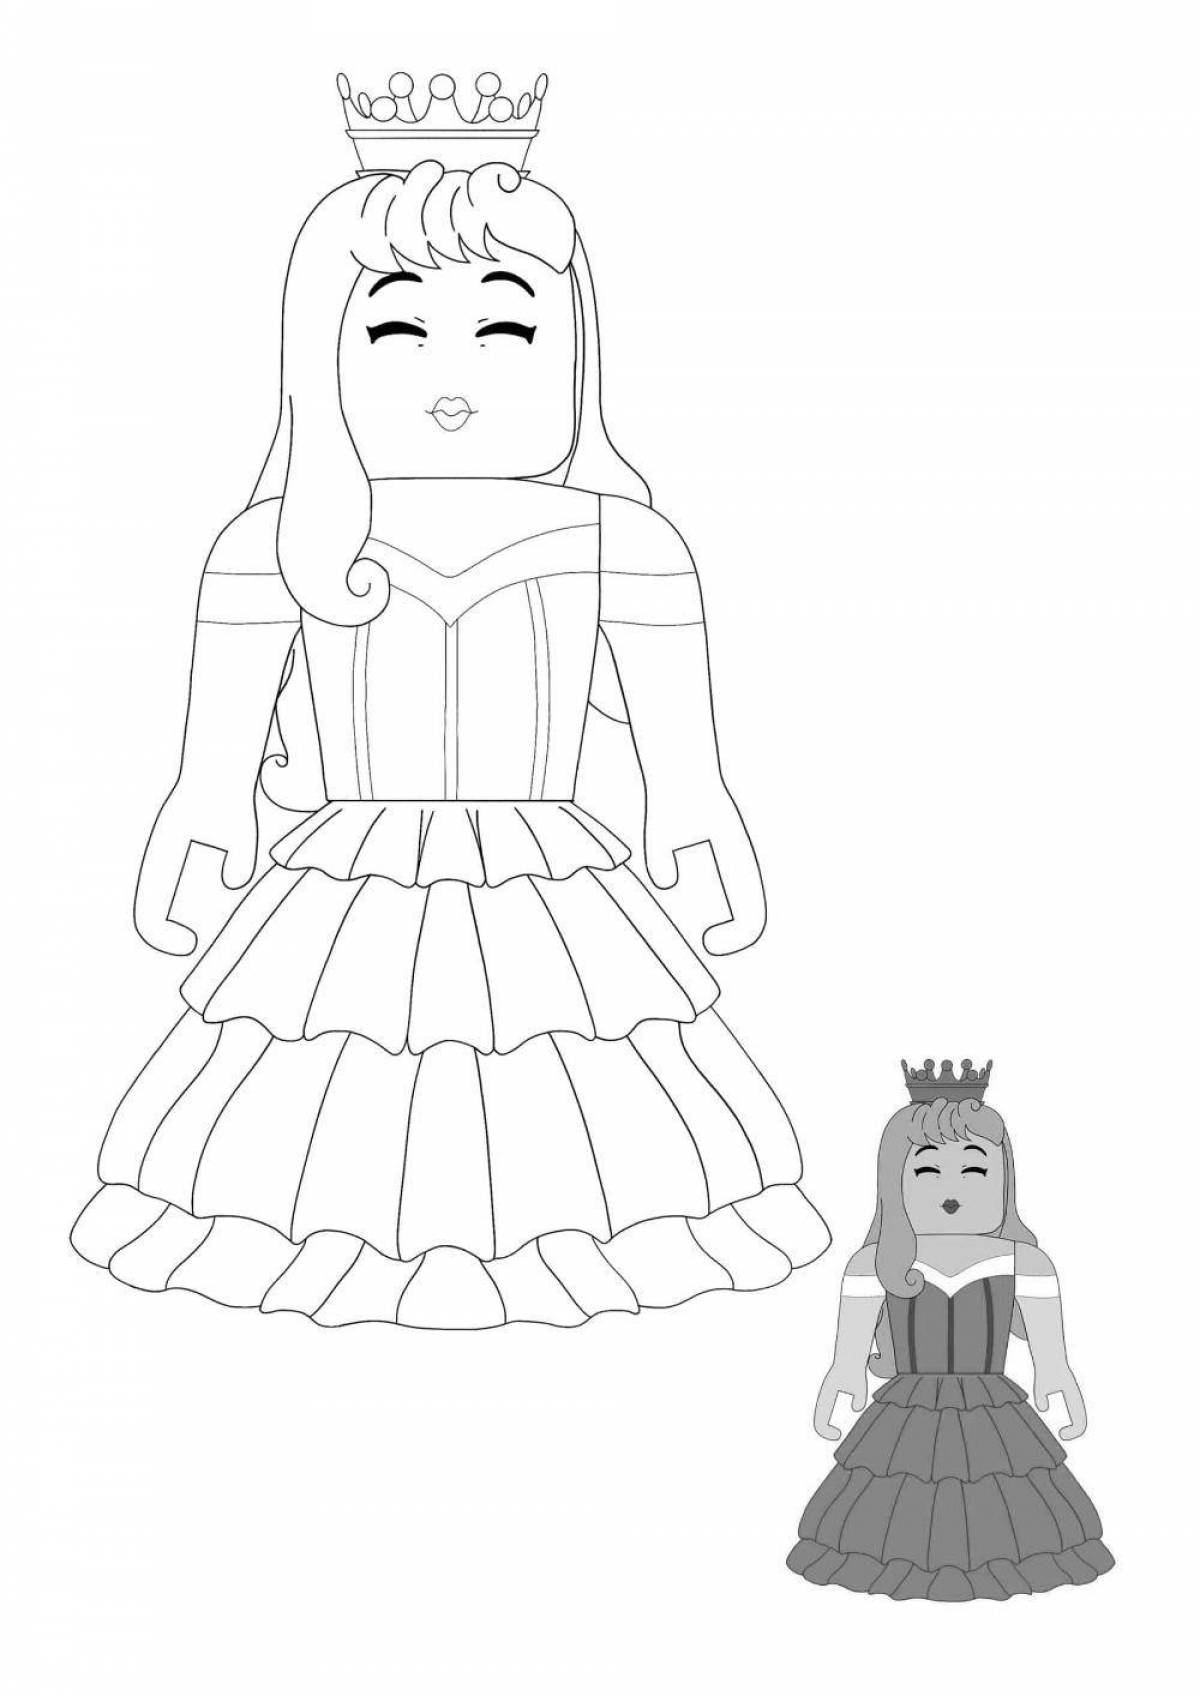 Roblox people girls coloring pages